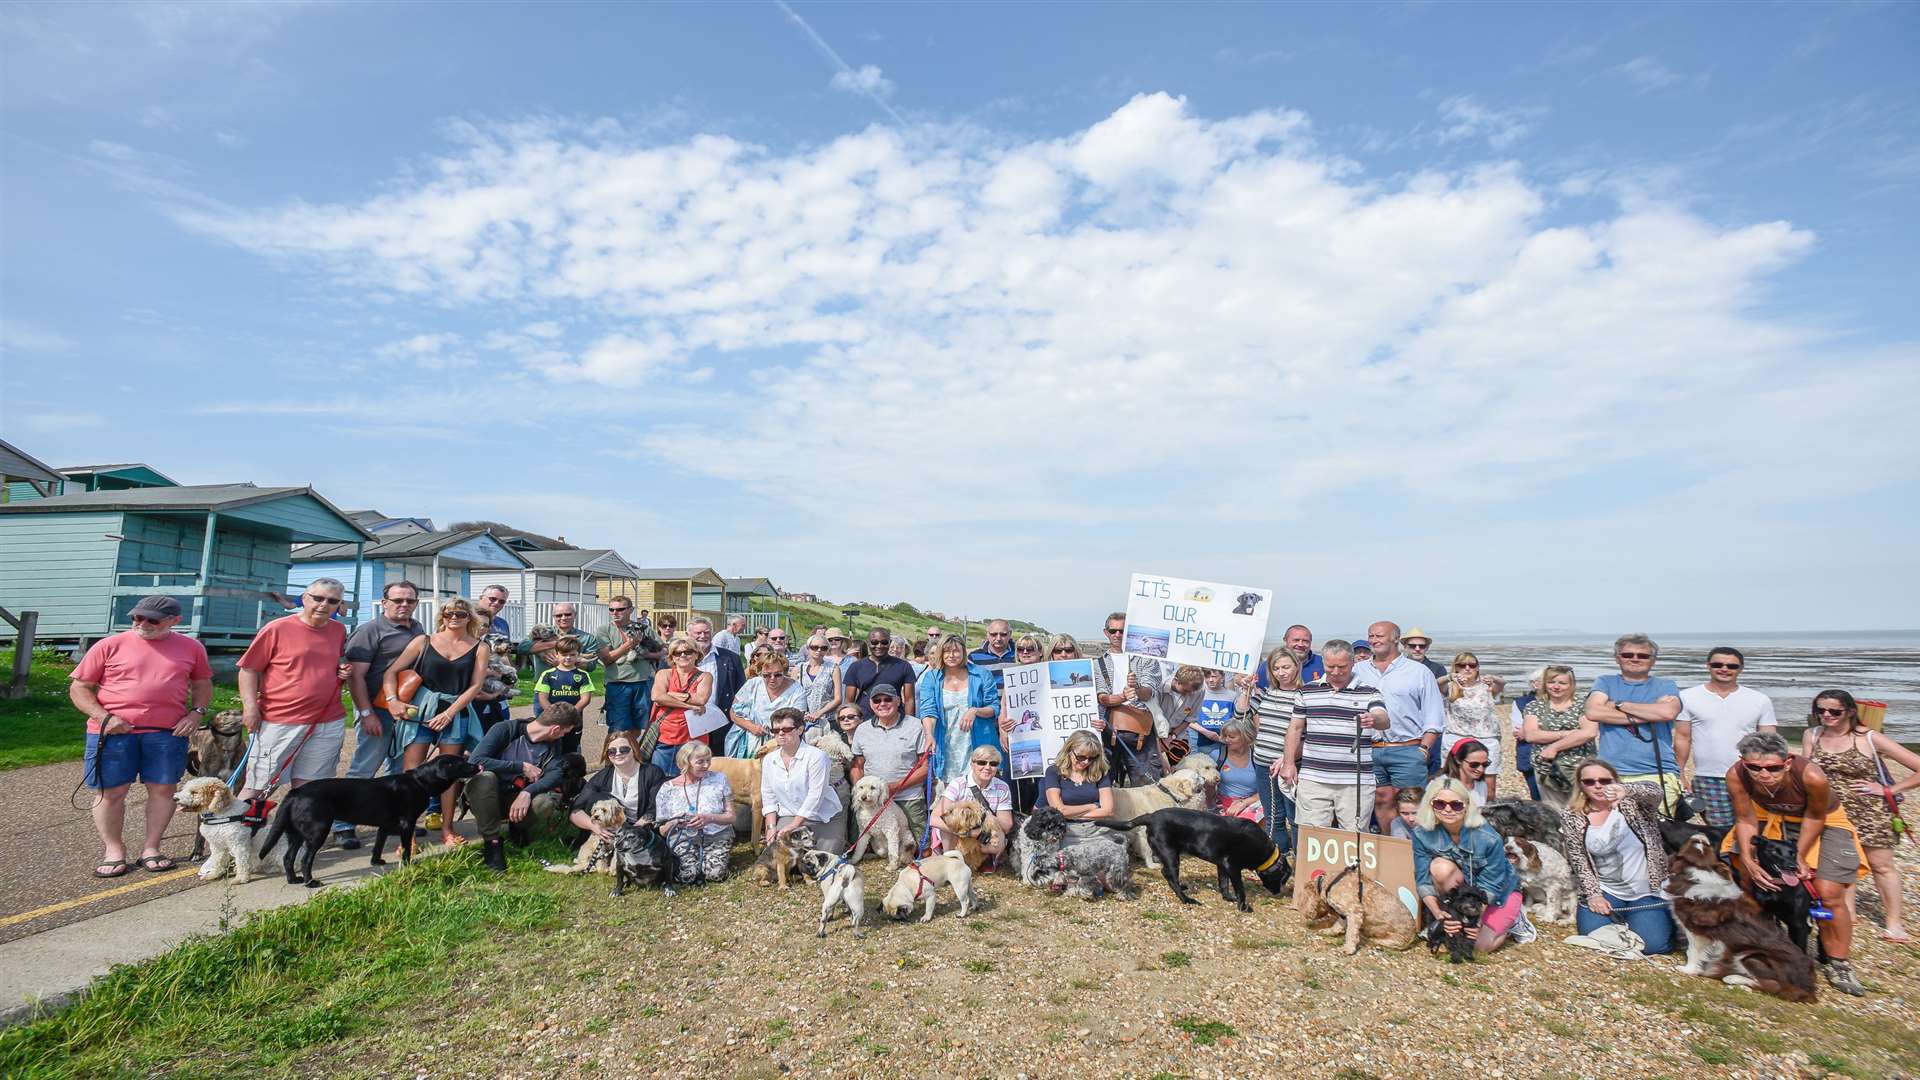 A group of more than 80 protesters took a stand at Tankerton.